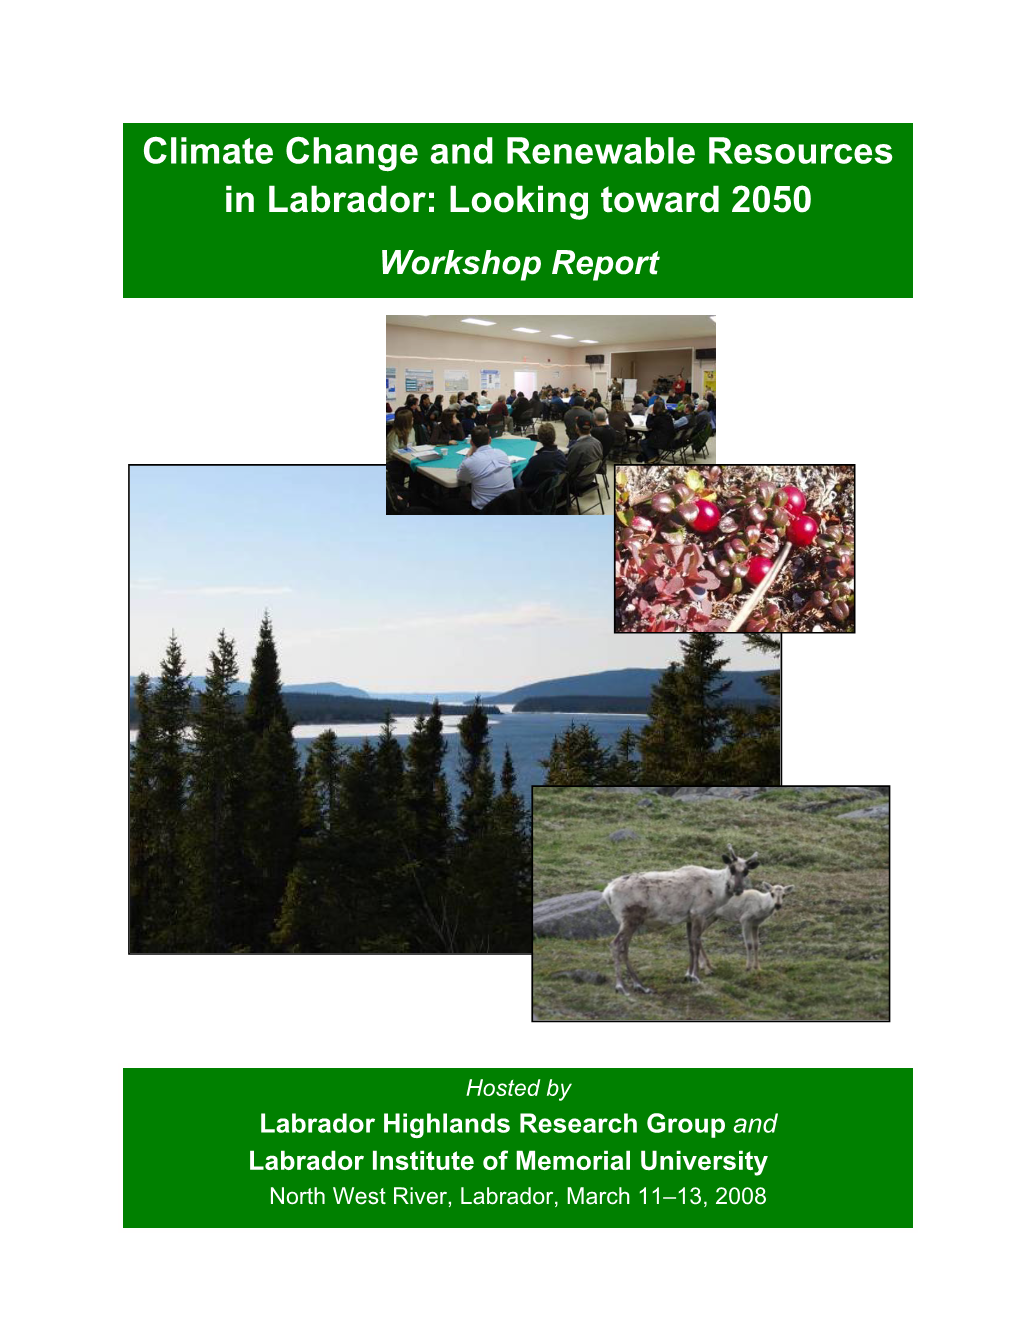 Climate Change and Renewable Resources in Labrador: Looking Toward 2050 Workshop Report